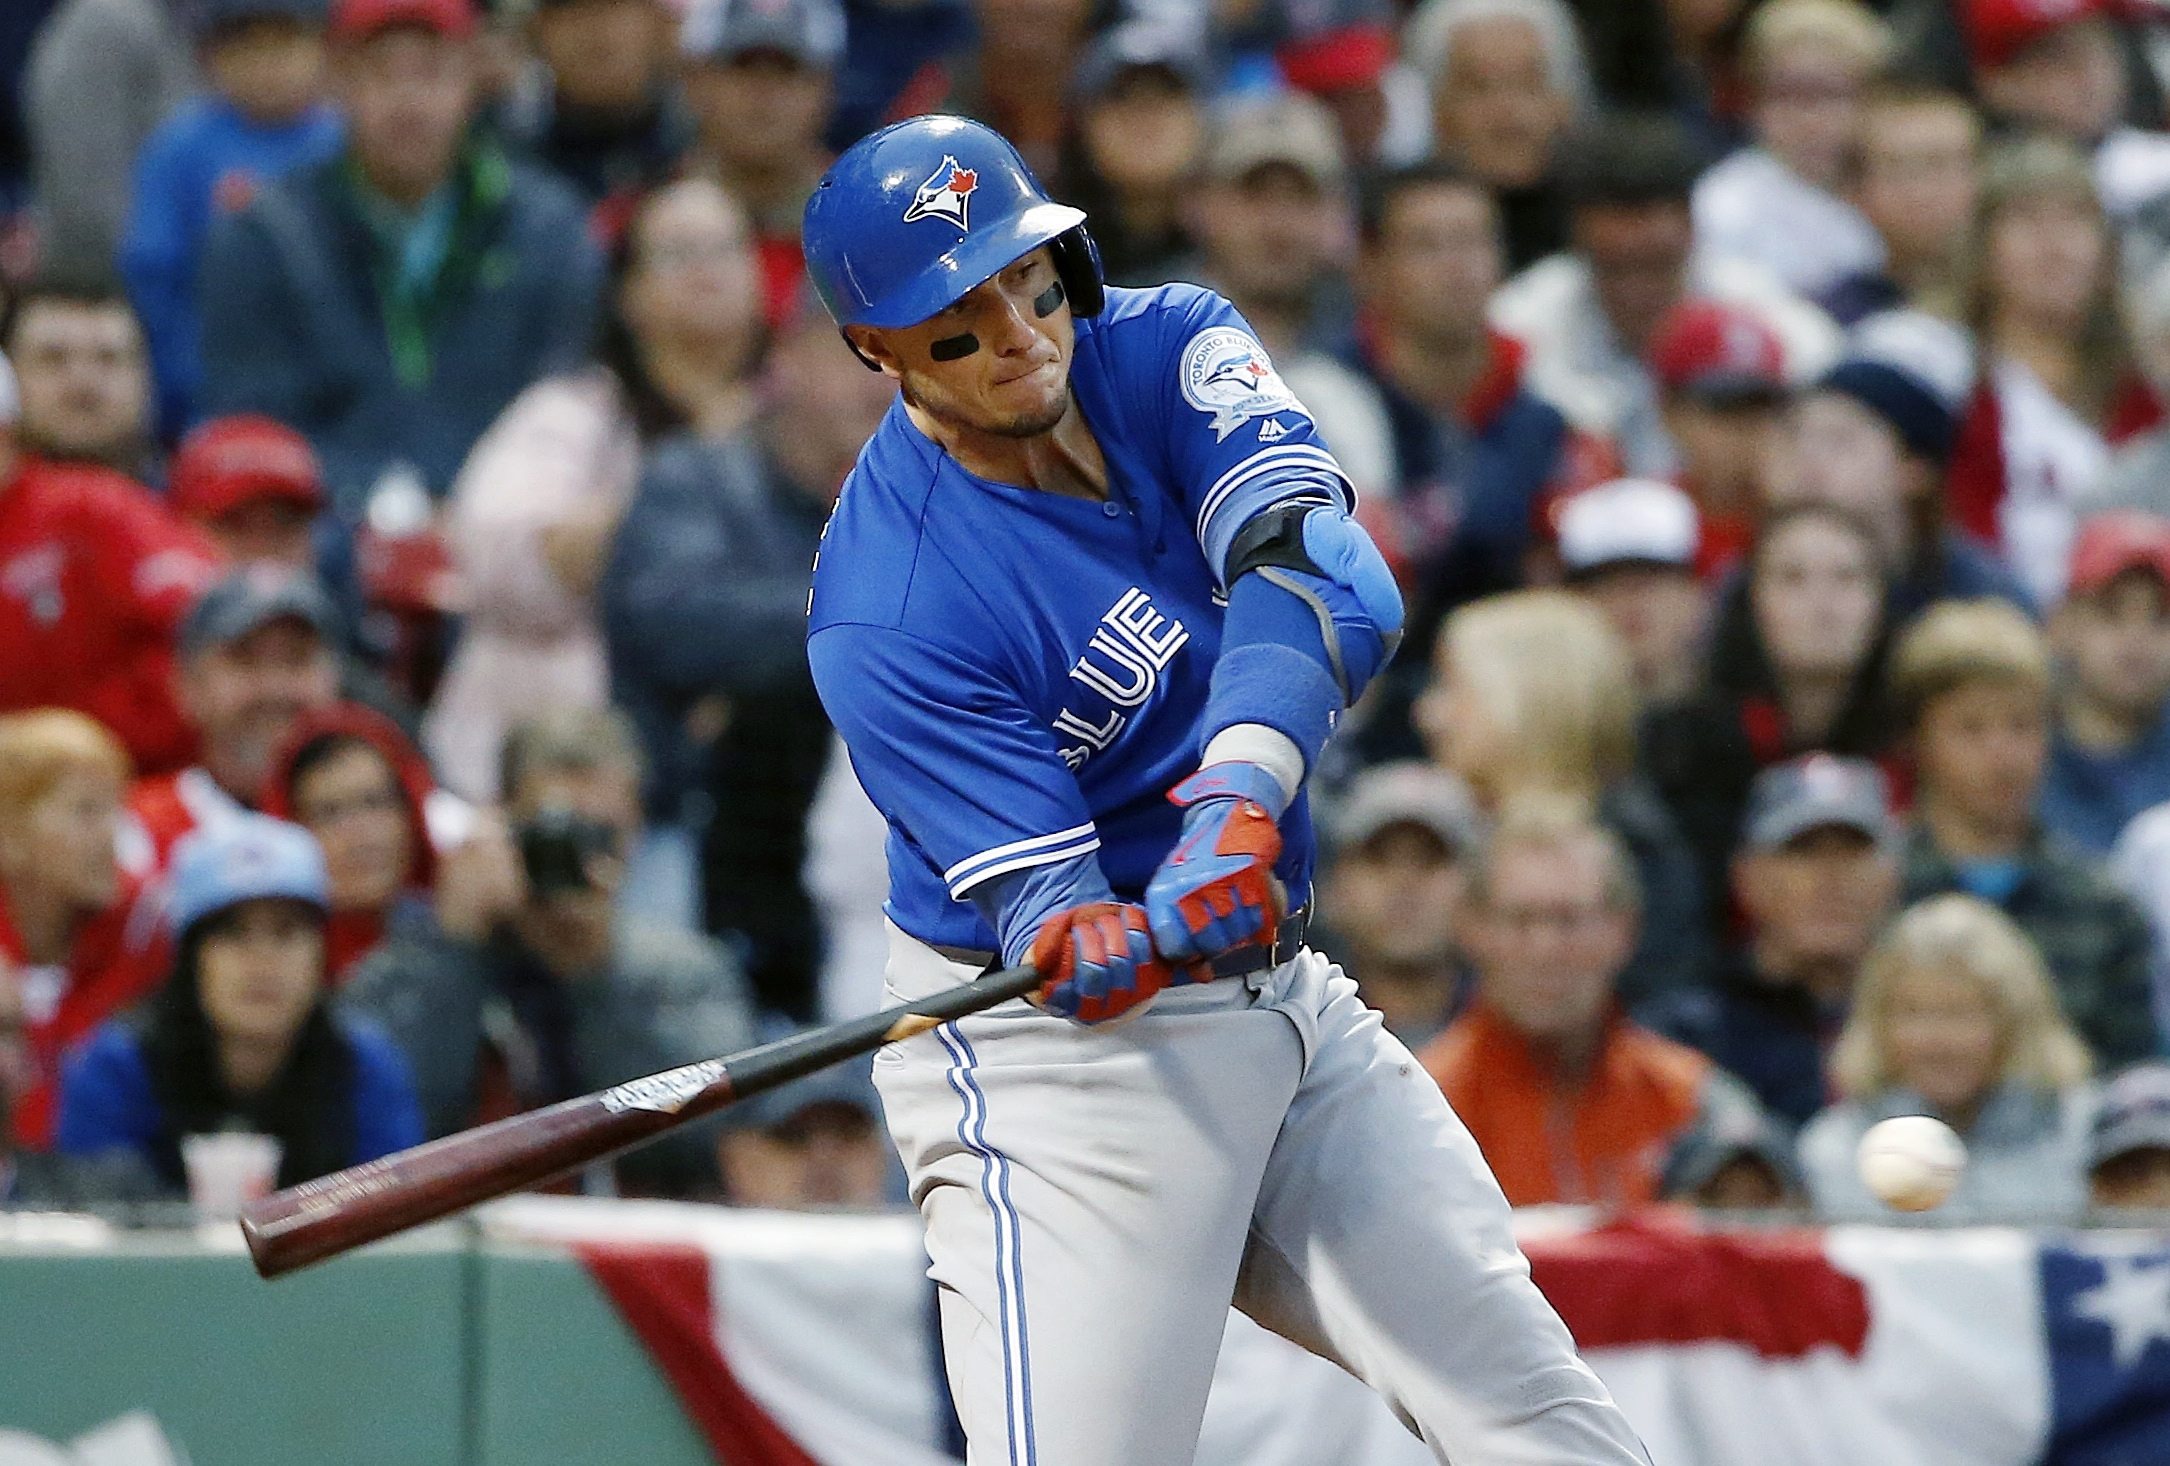 Blue Jays activate SS Tulowitzki from DL 